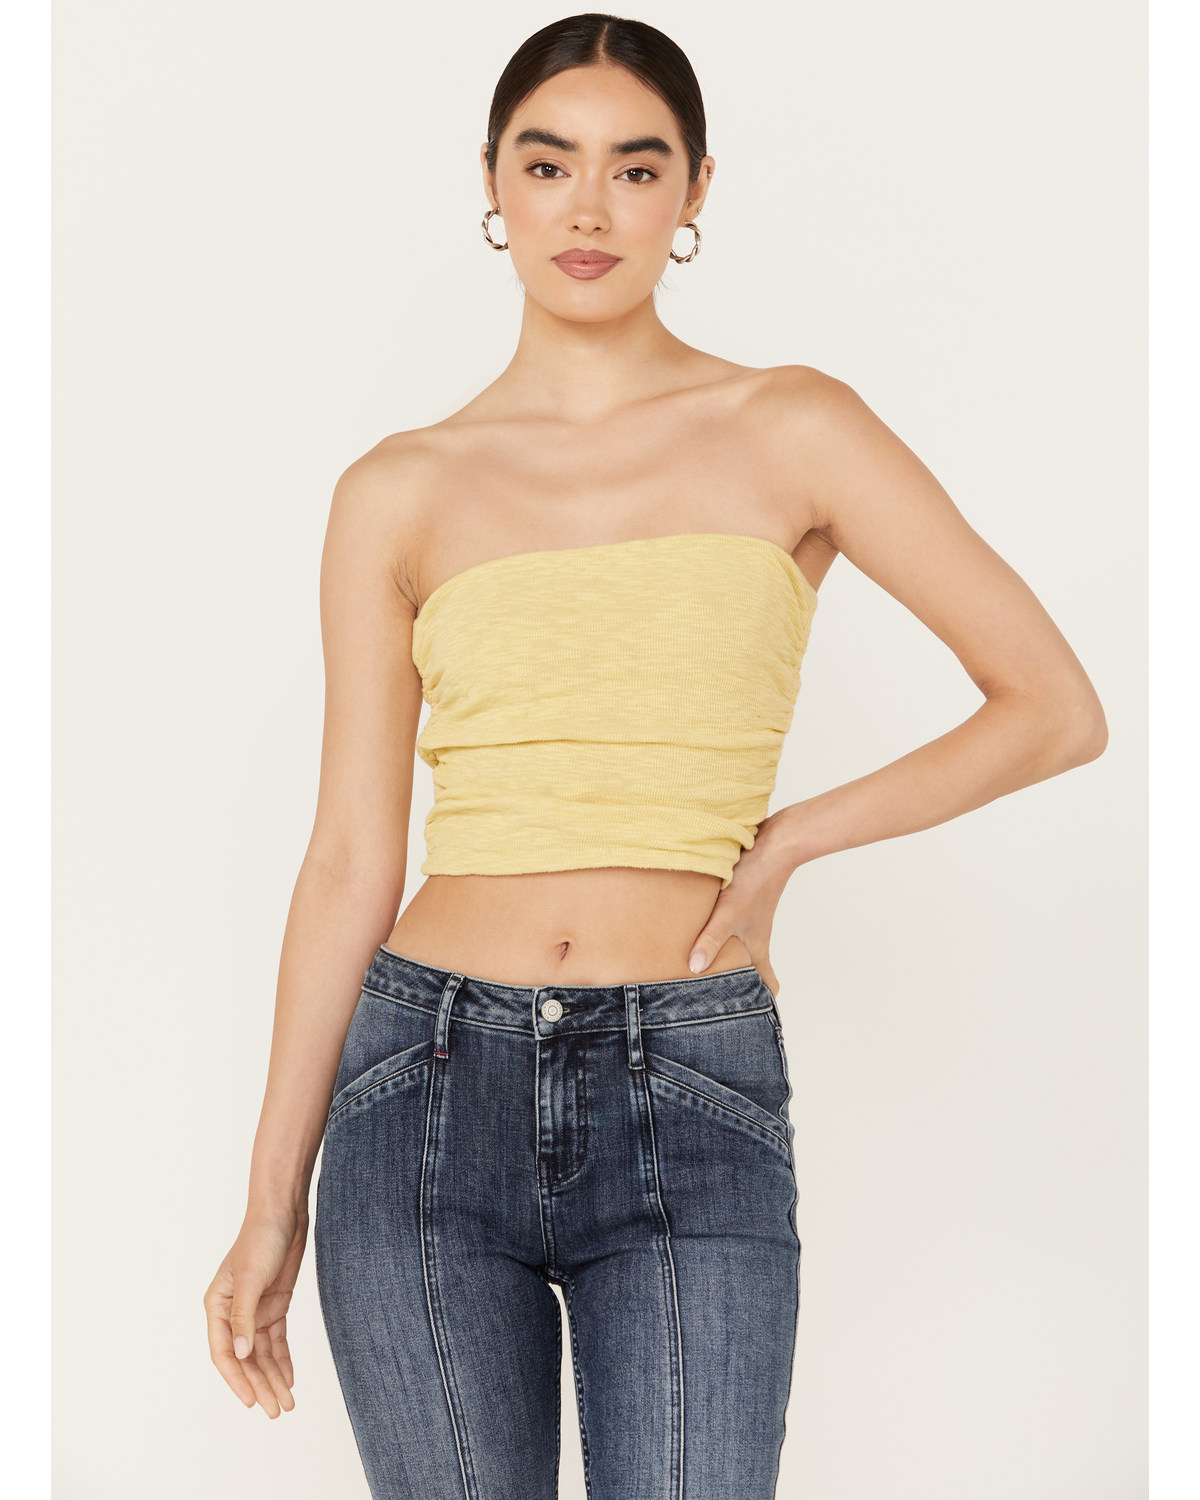 Free People Women's Boulevard Ruched Tube Top